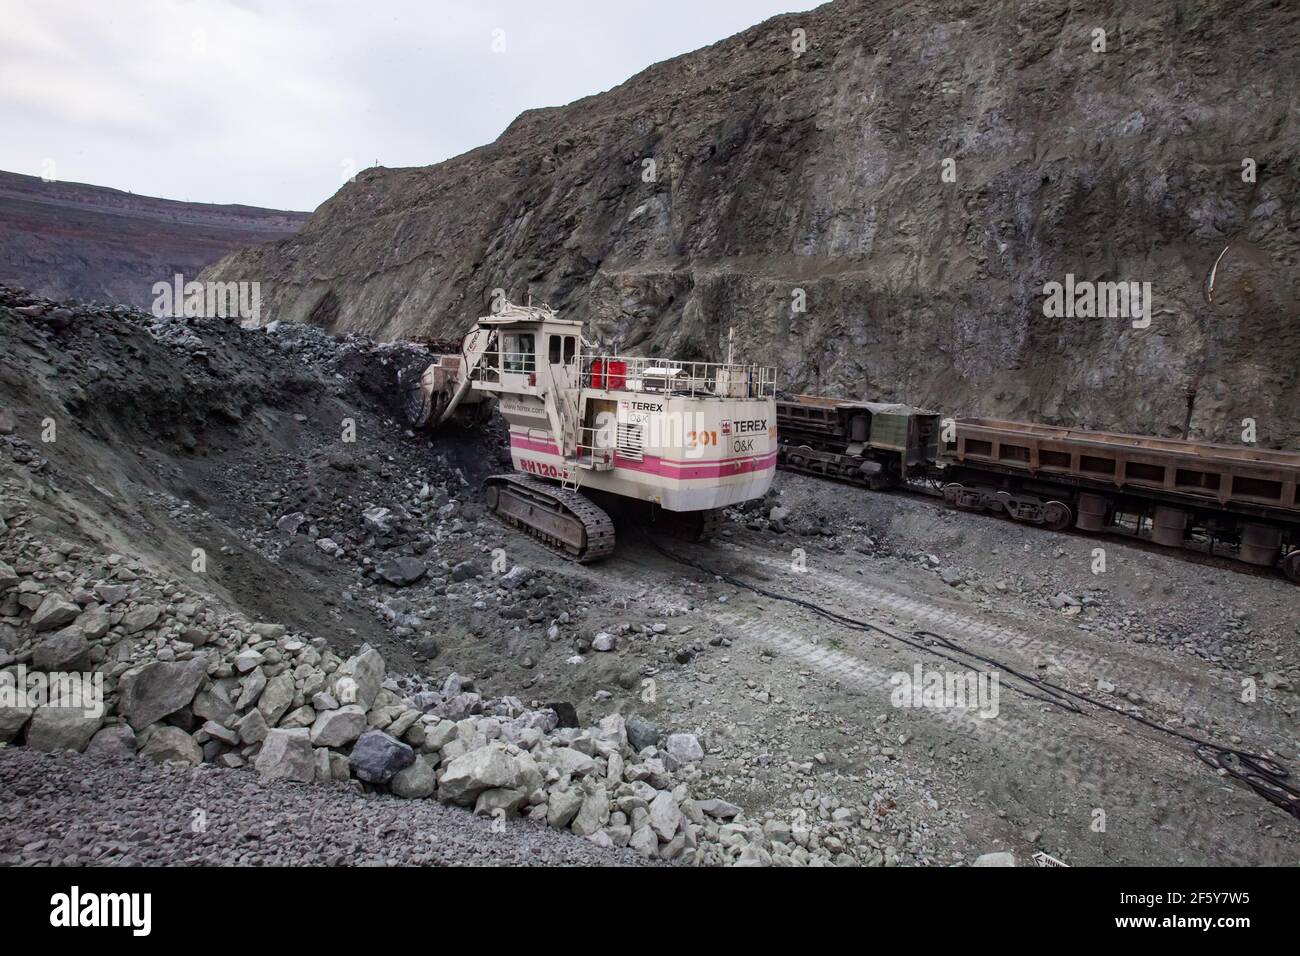 Rudny/Kazakhstan - May 14 2012:  Open-pit mining iron ore in quarry. Excavator Terex loading ore in cargo train wagon. Stock Photo